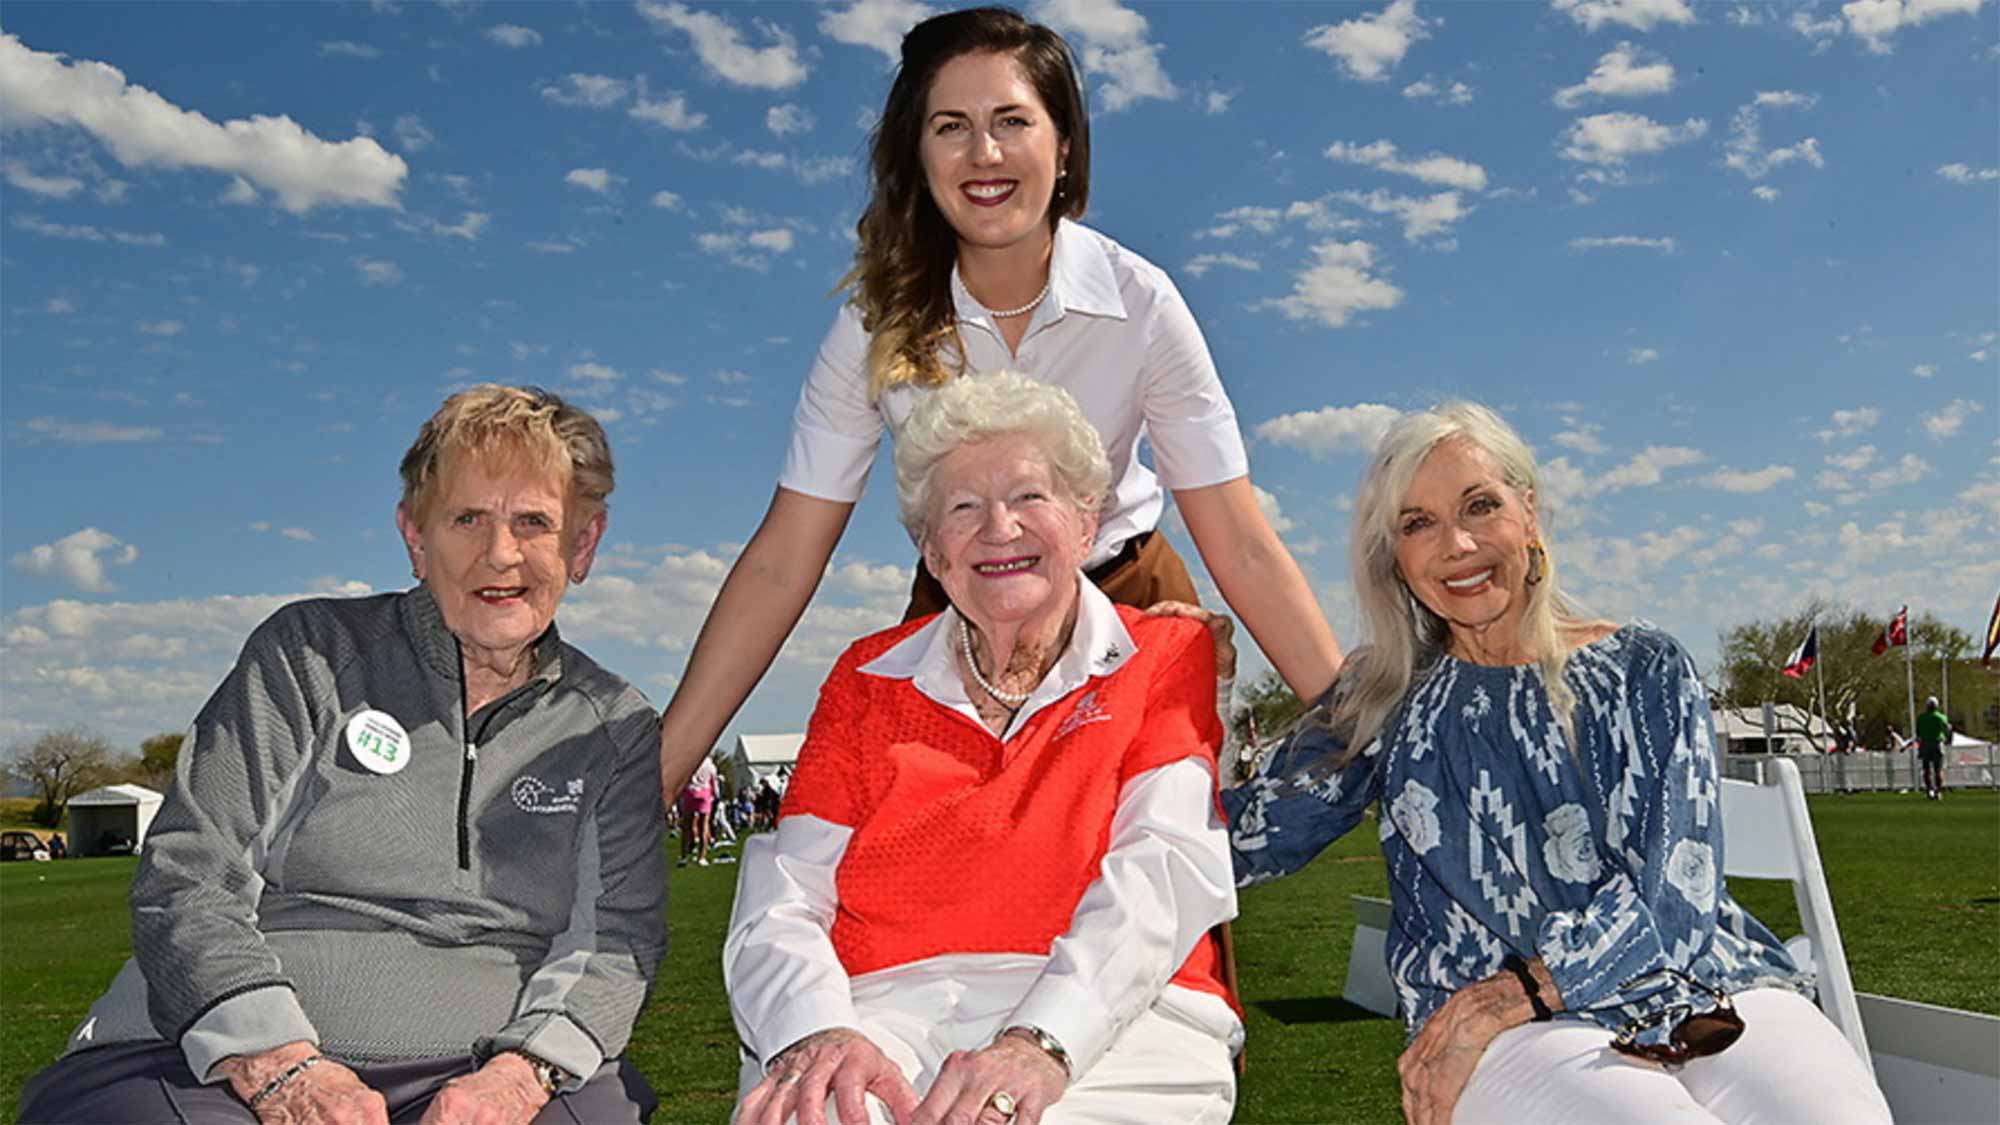 Sandra Gal poses with LPGA Founders Shirley Spork, Marilynn Smith and Marlene Bauer Hagge during the 2019 Bank of Hope Founders Cup